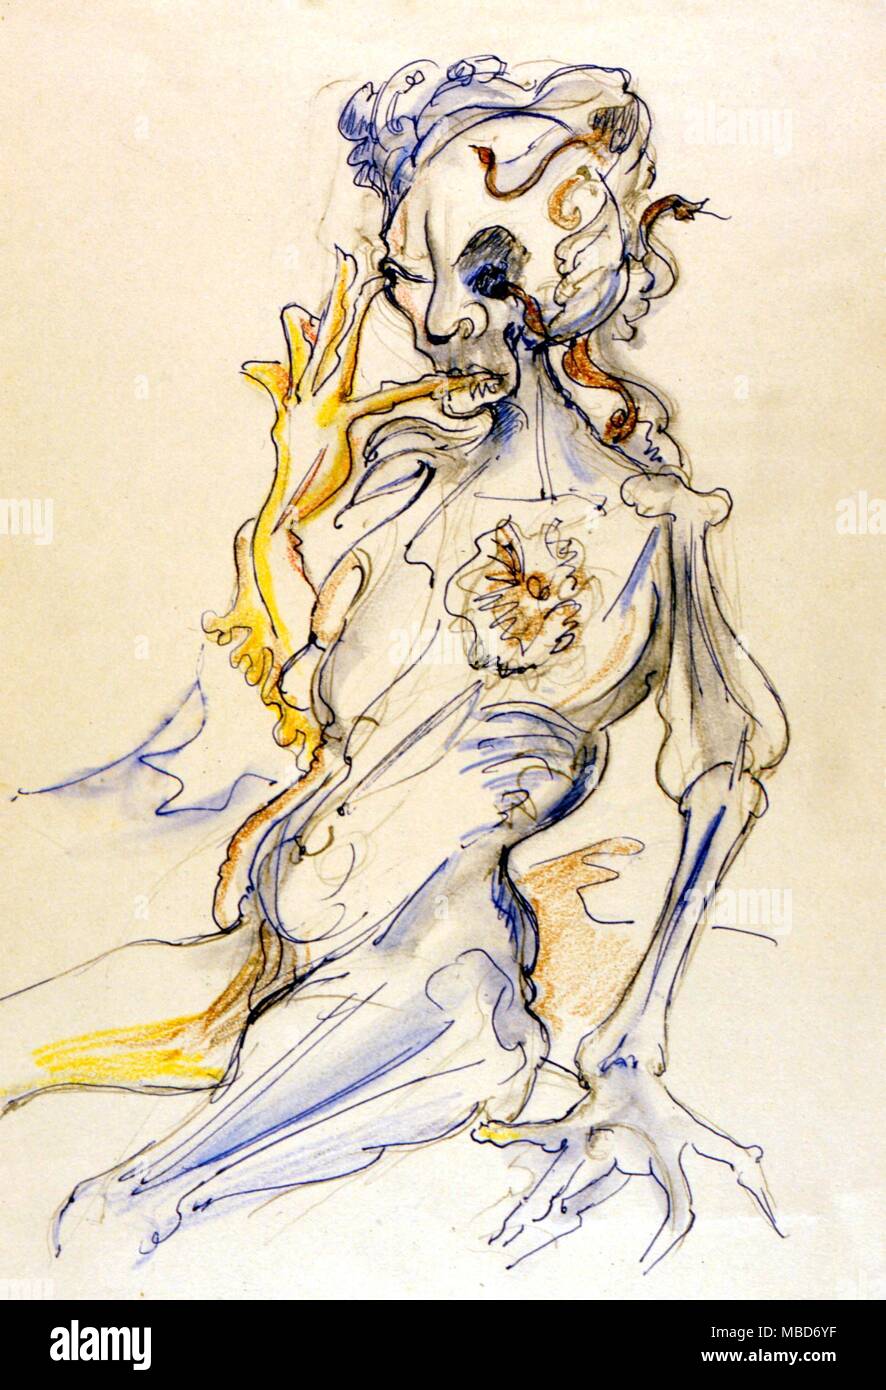 Lilith in her role of mistress over the dying - drawing of Lilith entitled Bag of Bones (or Heap of Bones) by Fay Pomerance - private collection Stock Photo